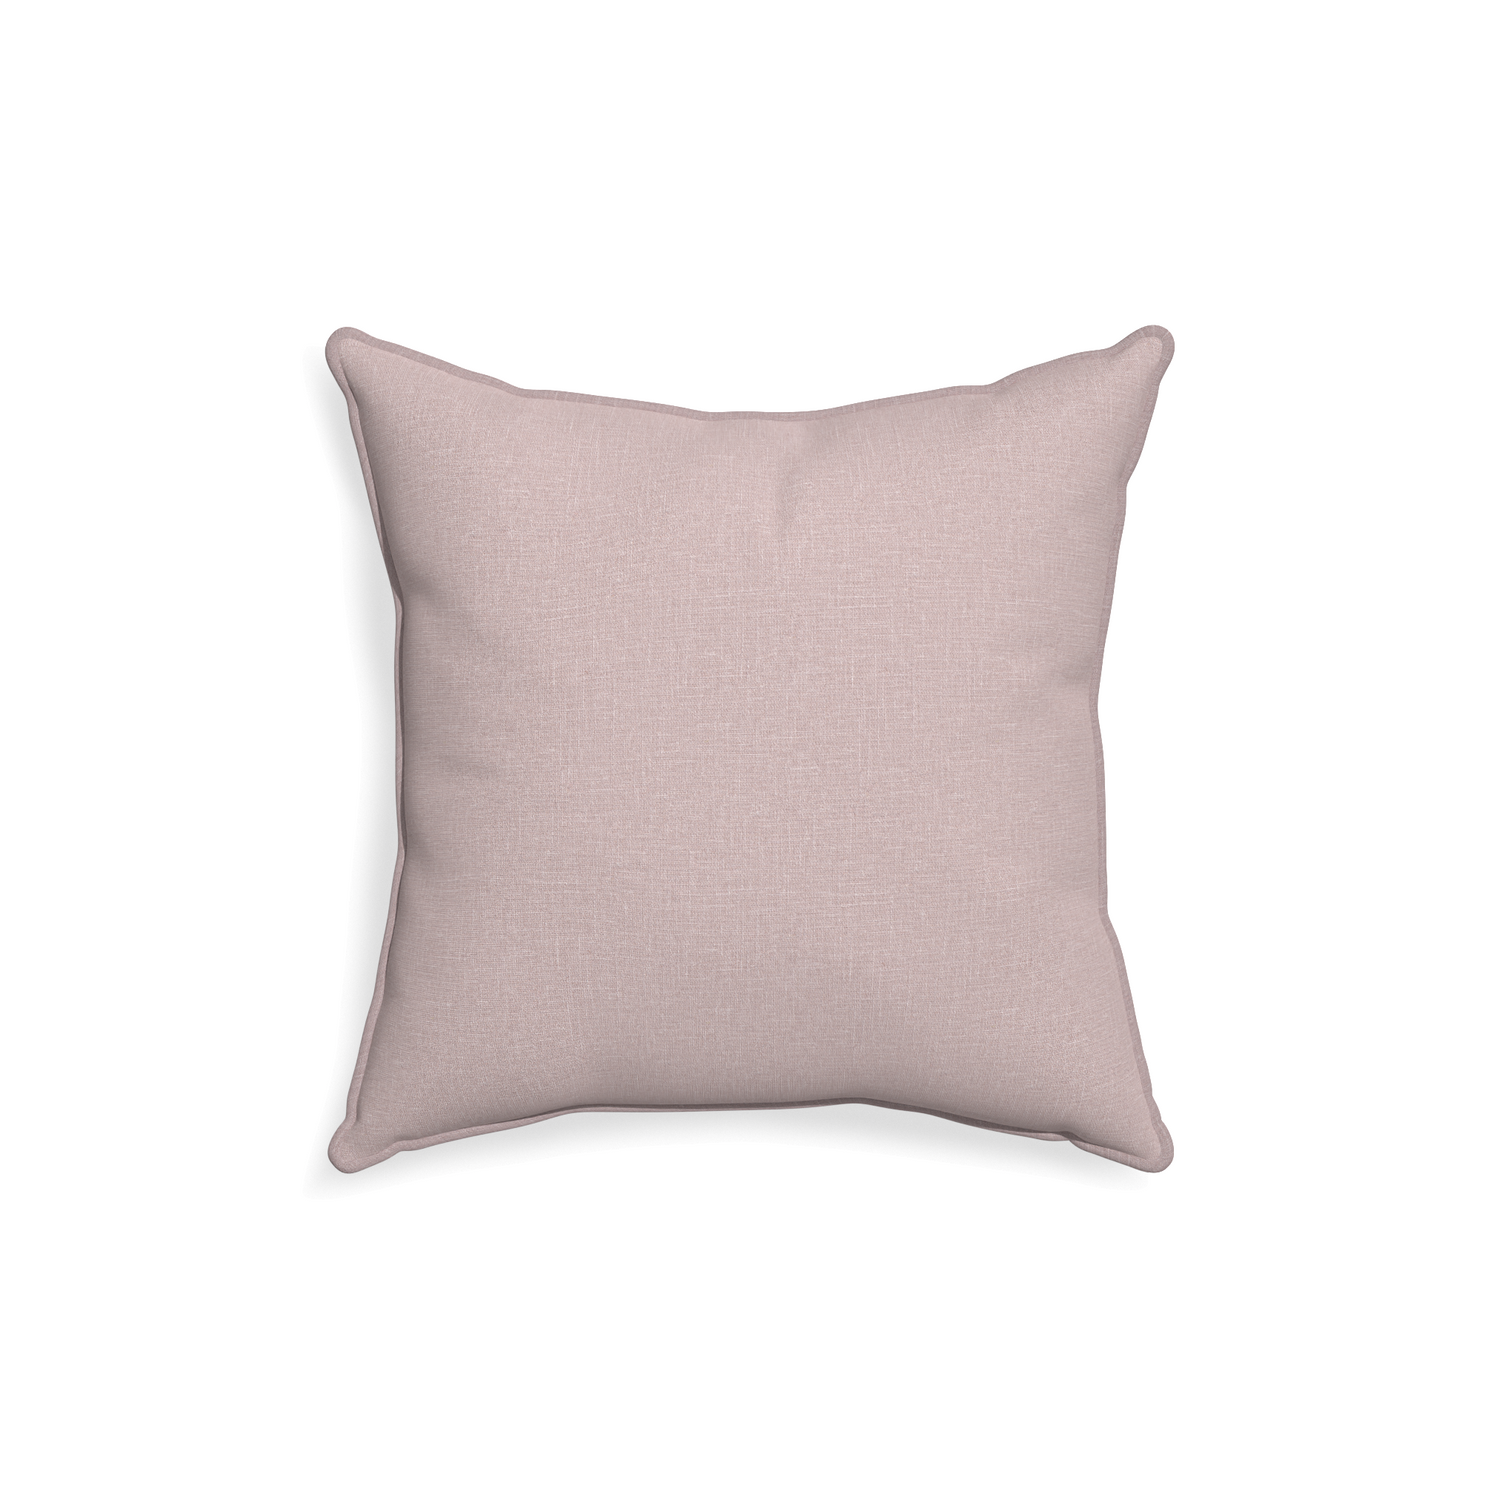 18-square orchid custom mauve pinkpillow with orchid piping on white background